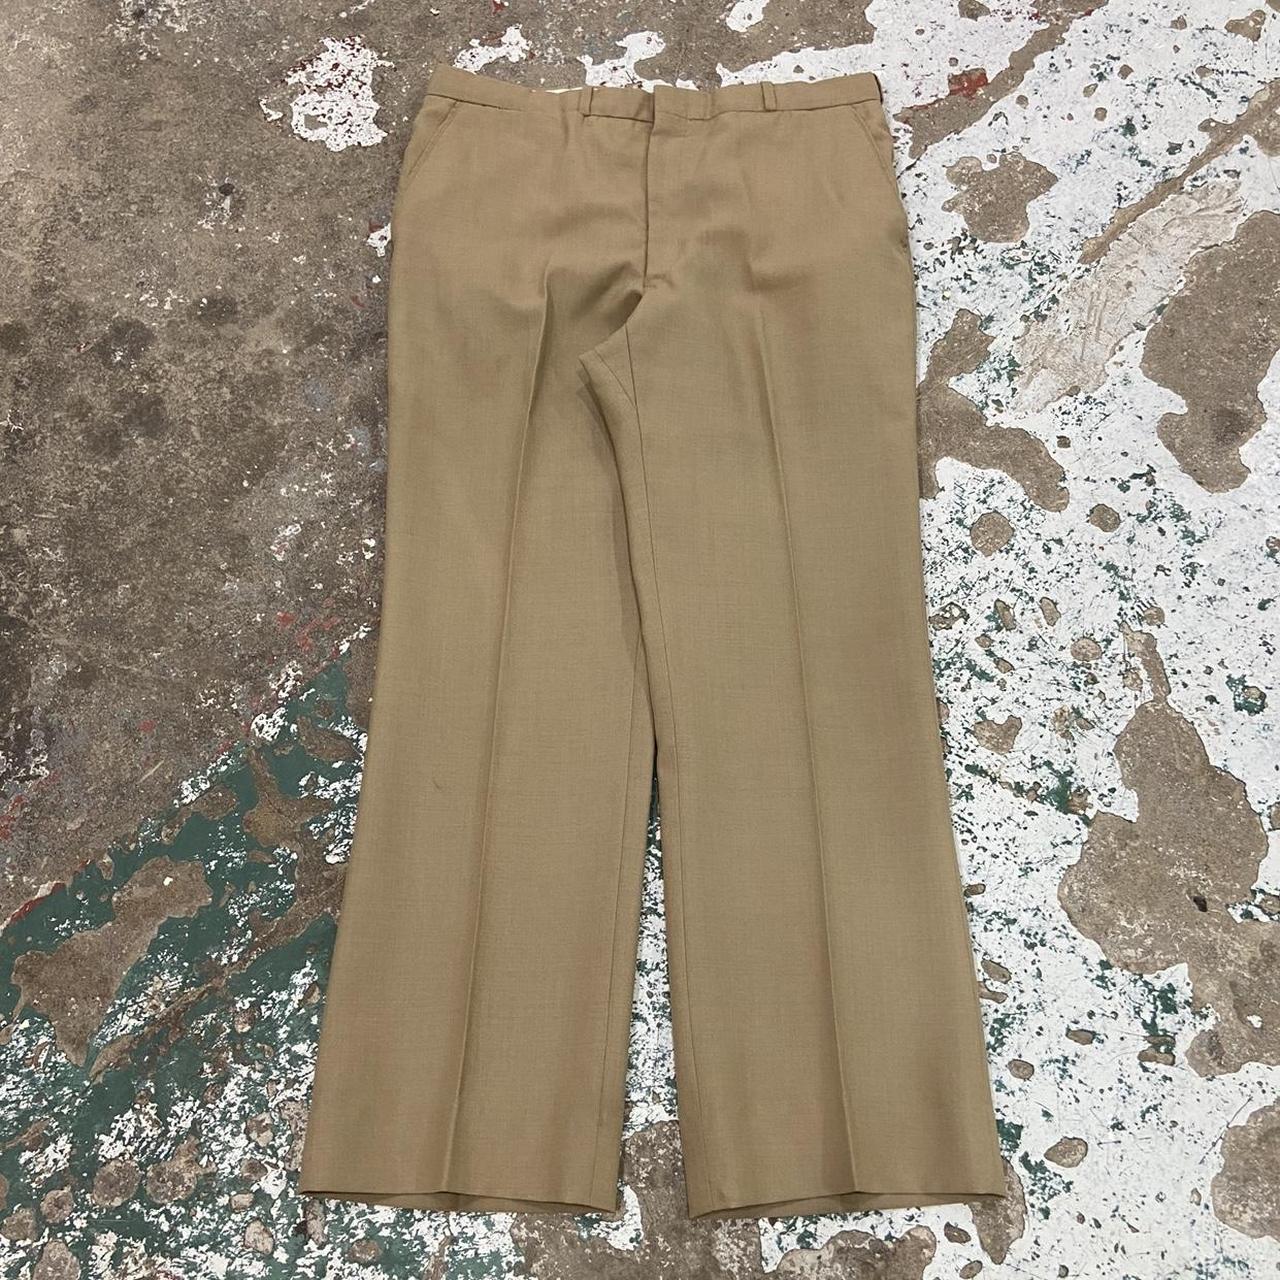 Vintage tan bootcut pleated trousers 70s/80s Has a... - Depop